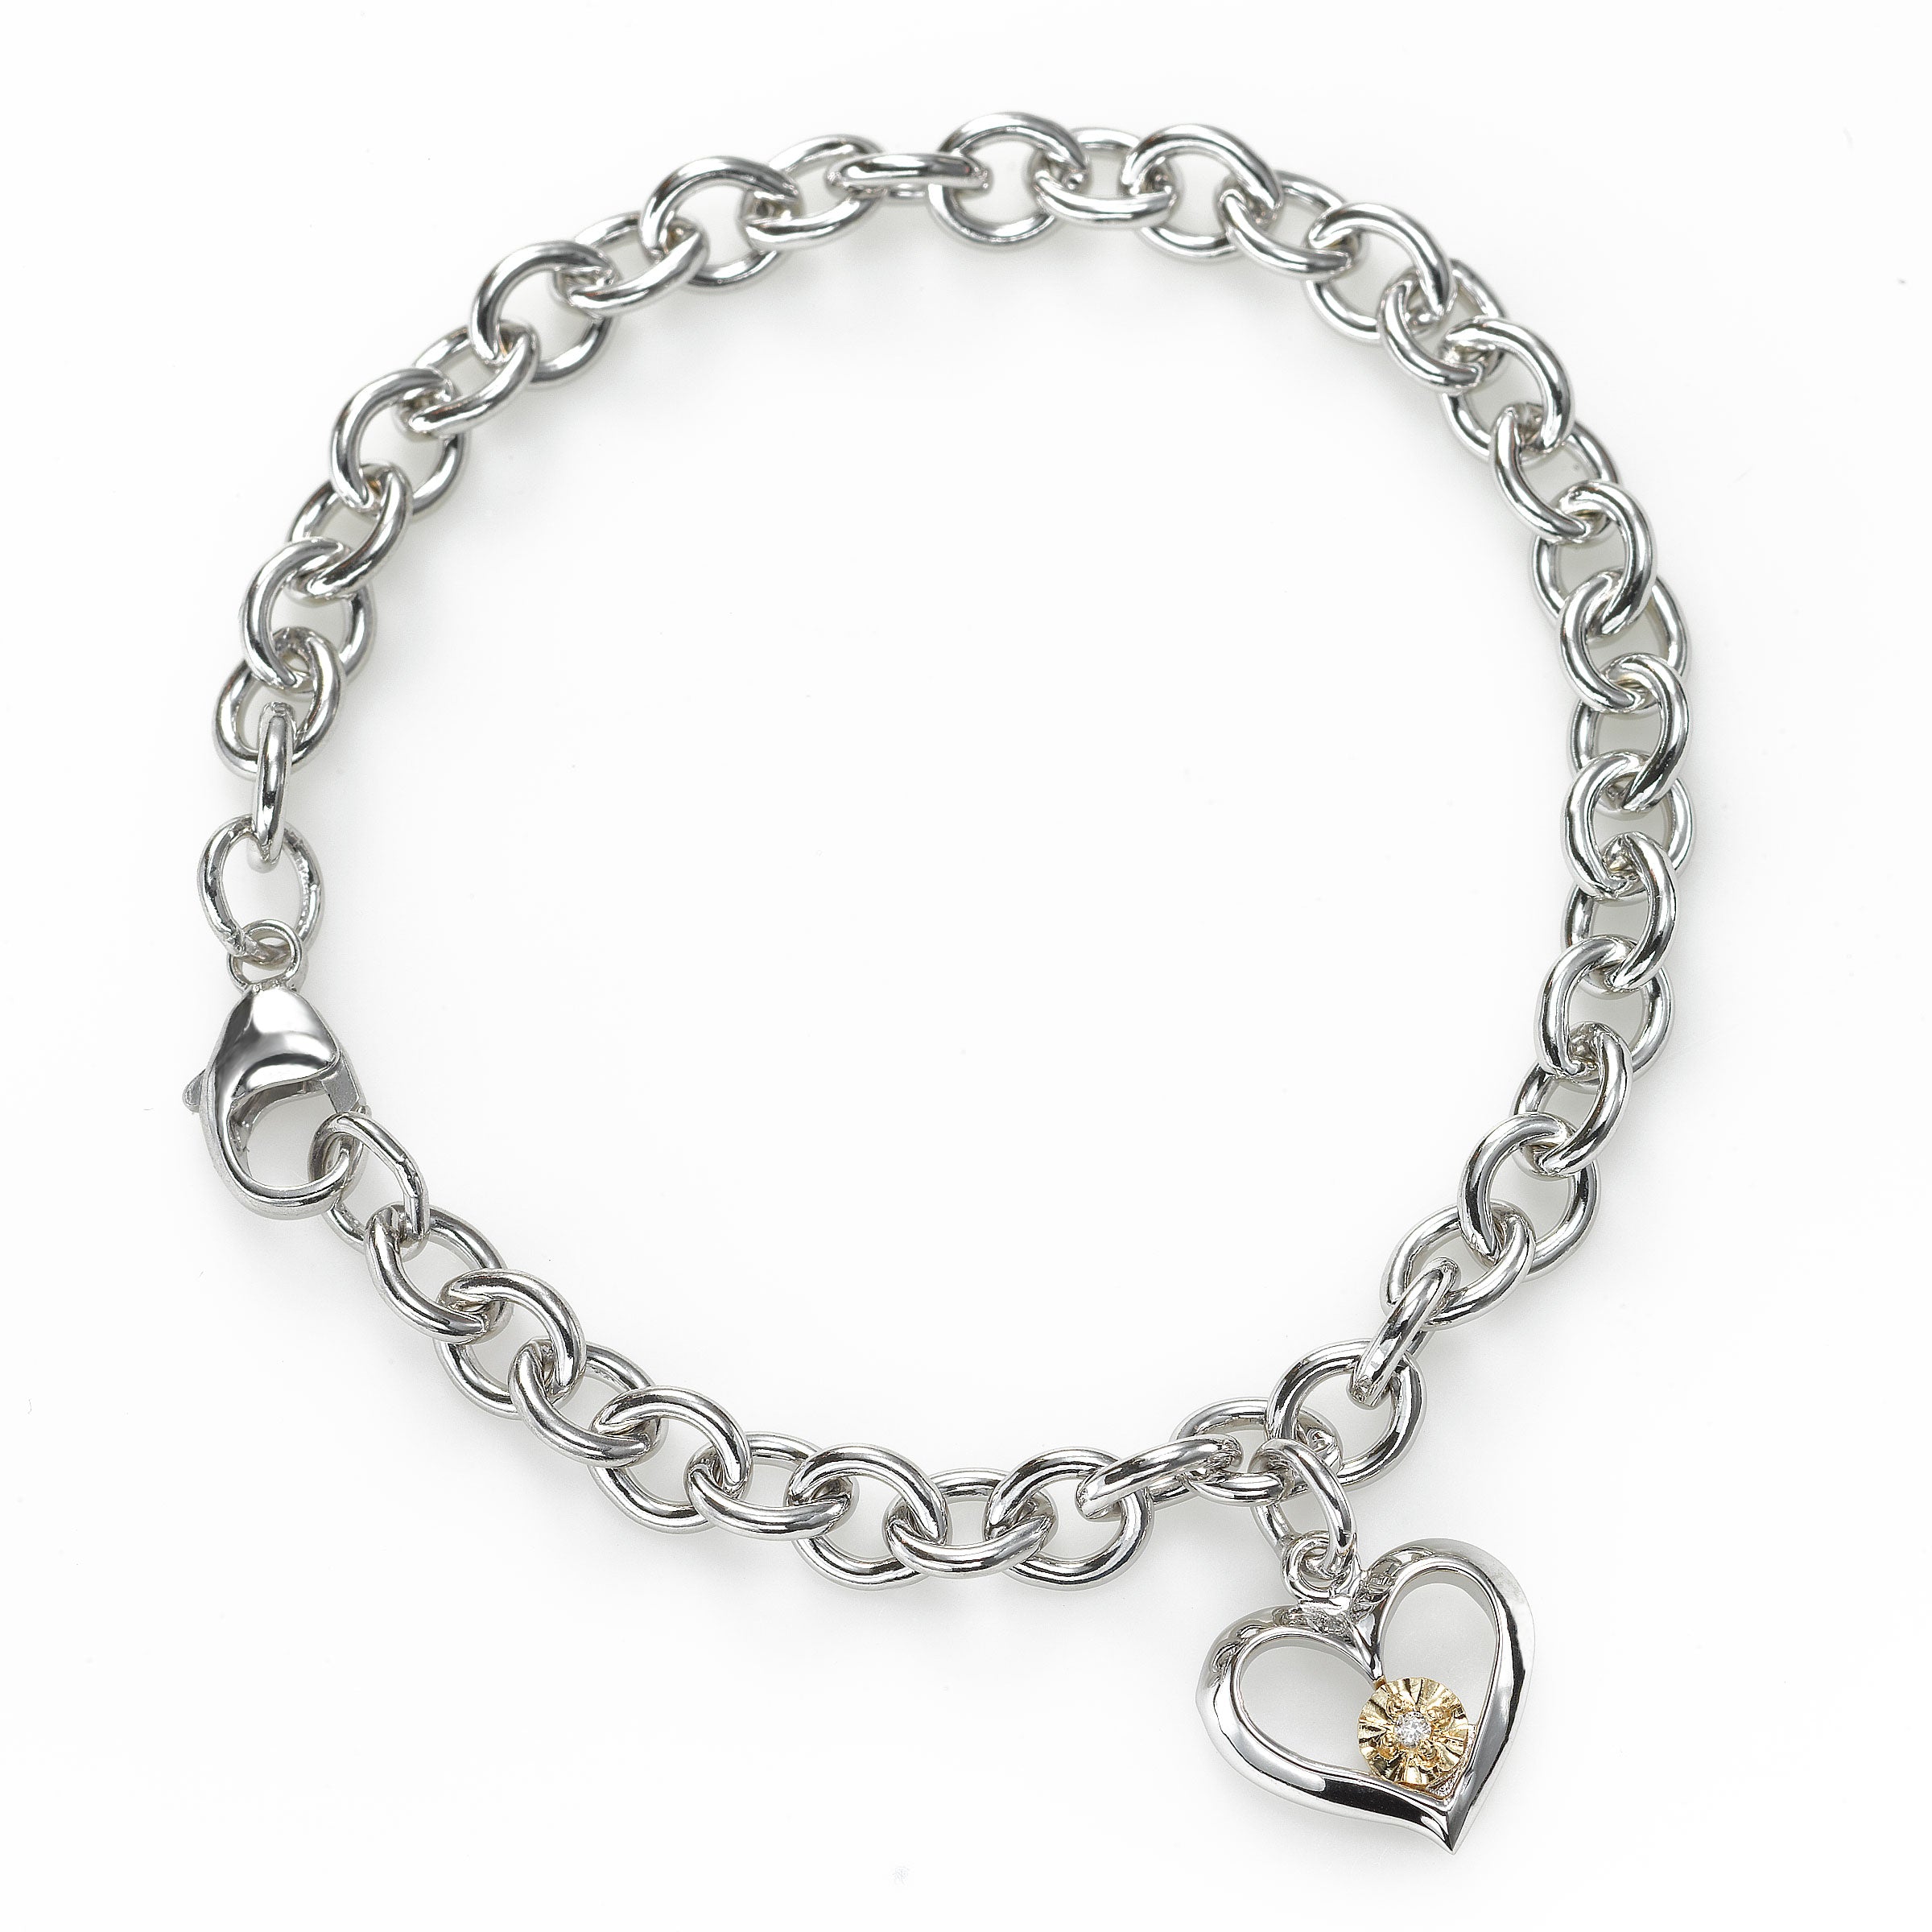 Teddy Bear Jewelry Collection Honoring St. Jude Diamond Charm Bracelet 1/20  ct tw Sterling Silver 7.5